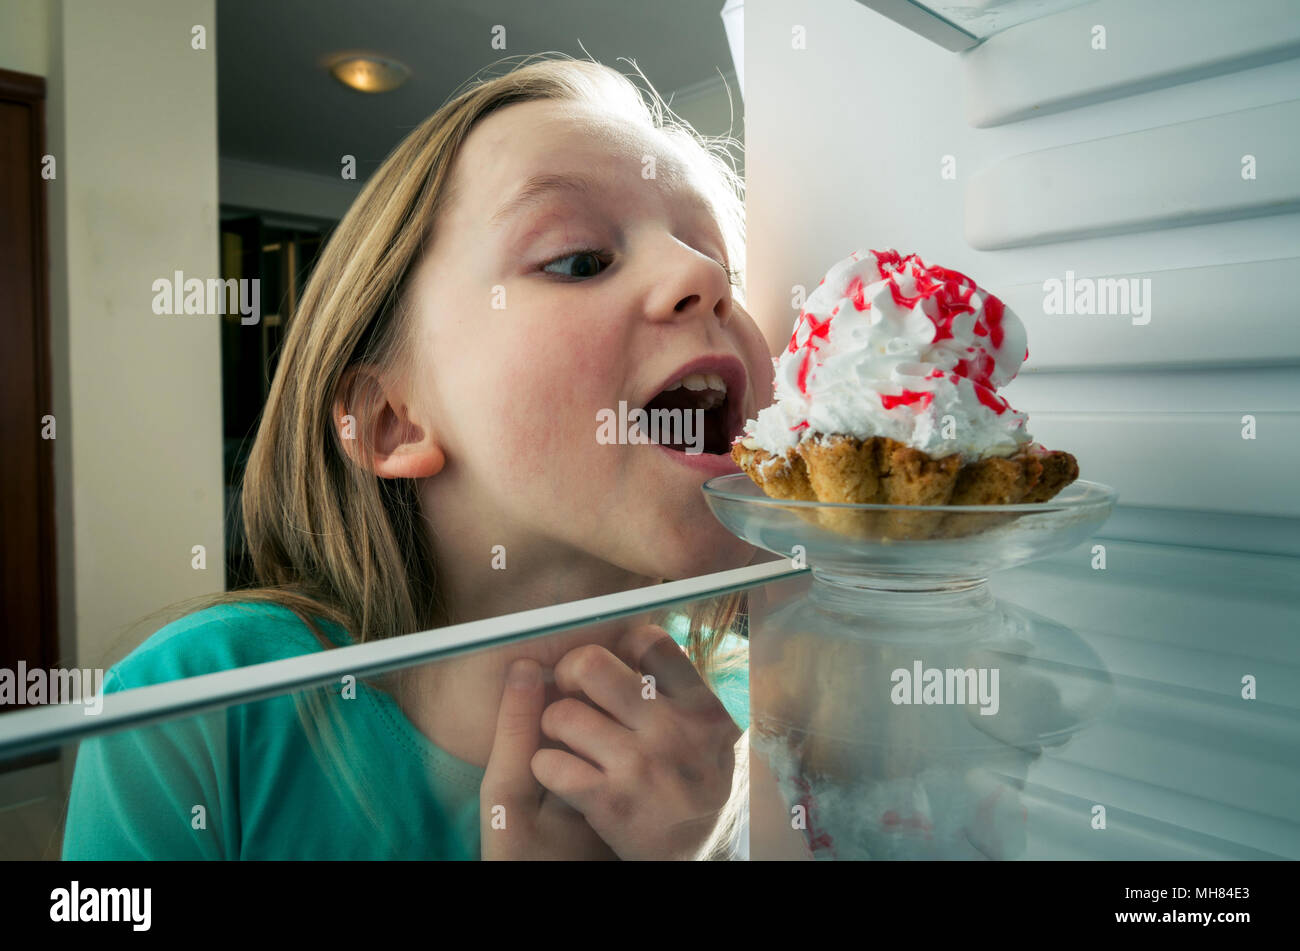 Small girl stealing the cake from fridge Stock Photo